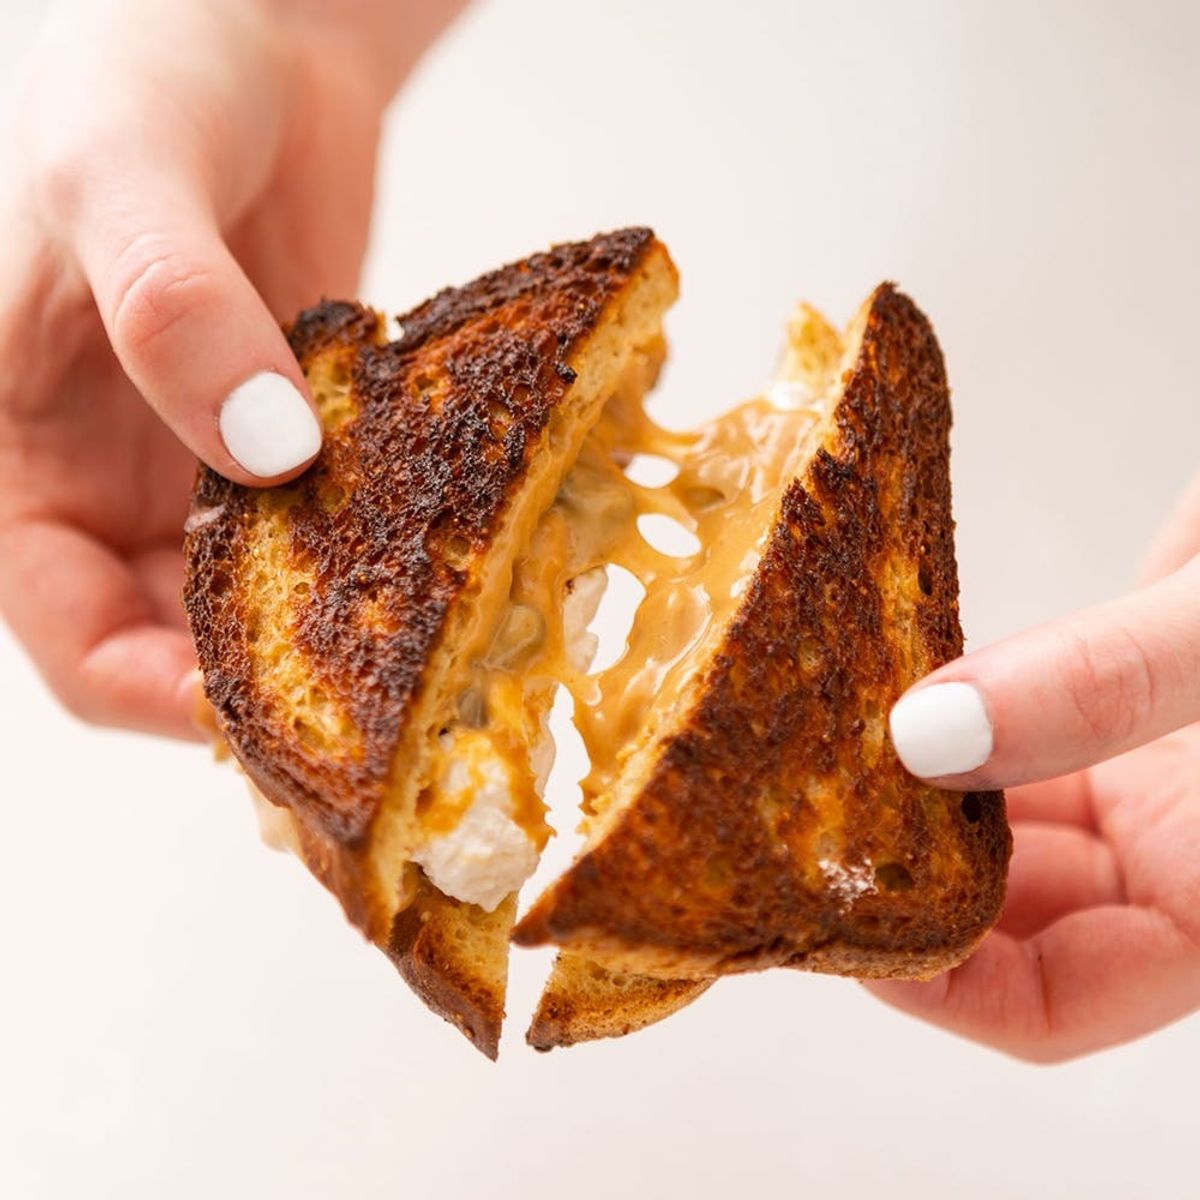 This Vegan Marshmallow Fluff Stars in the Best Grilled Fluffernutter Sando of Your Life